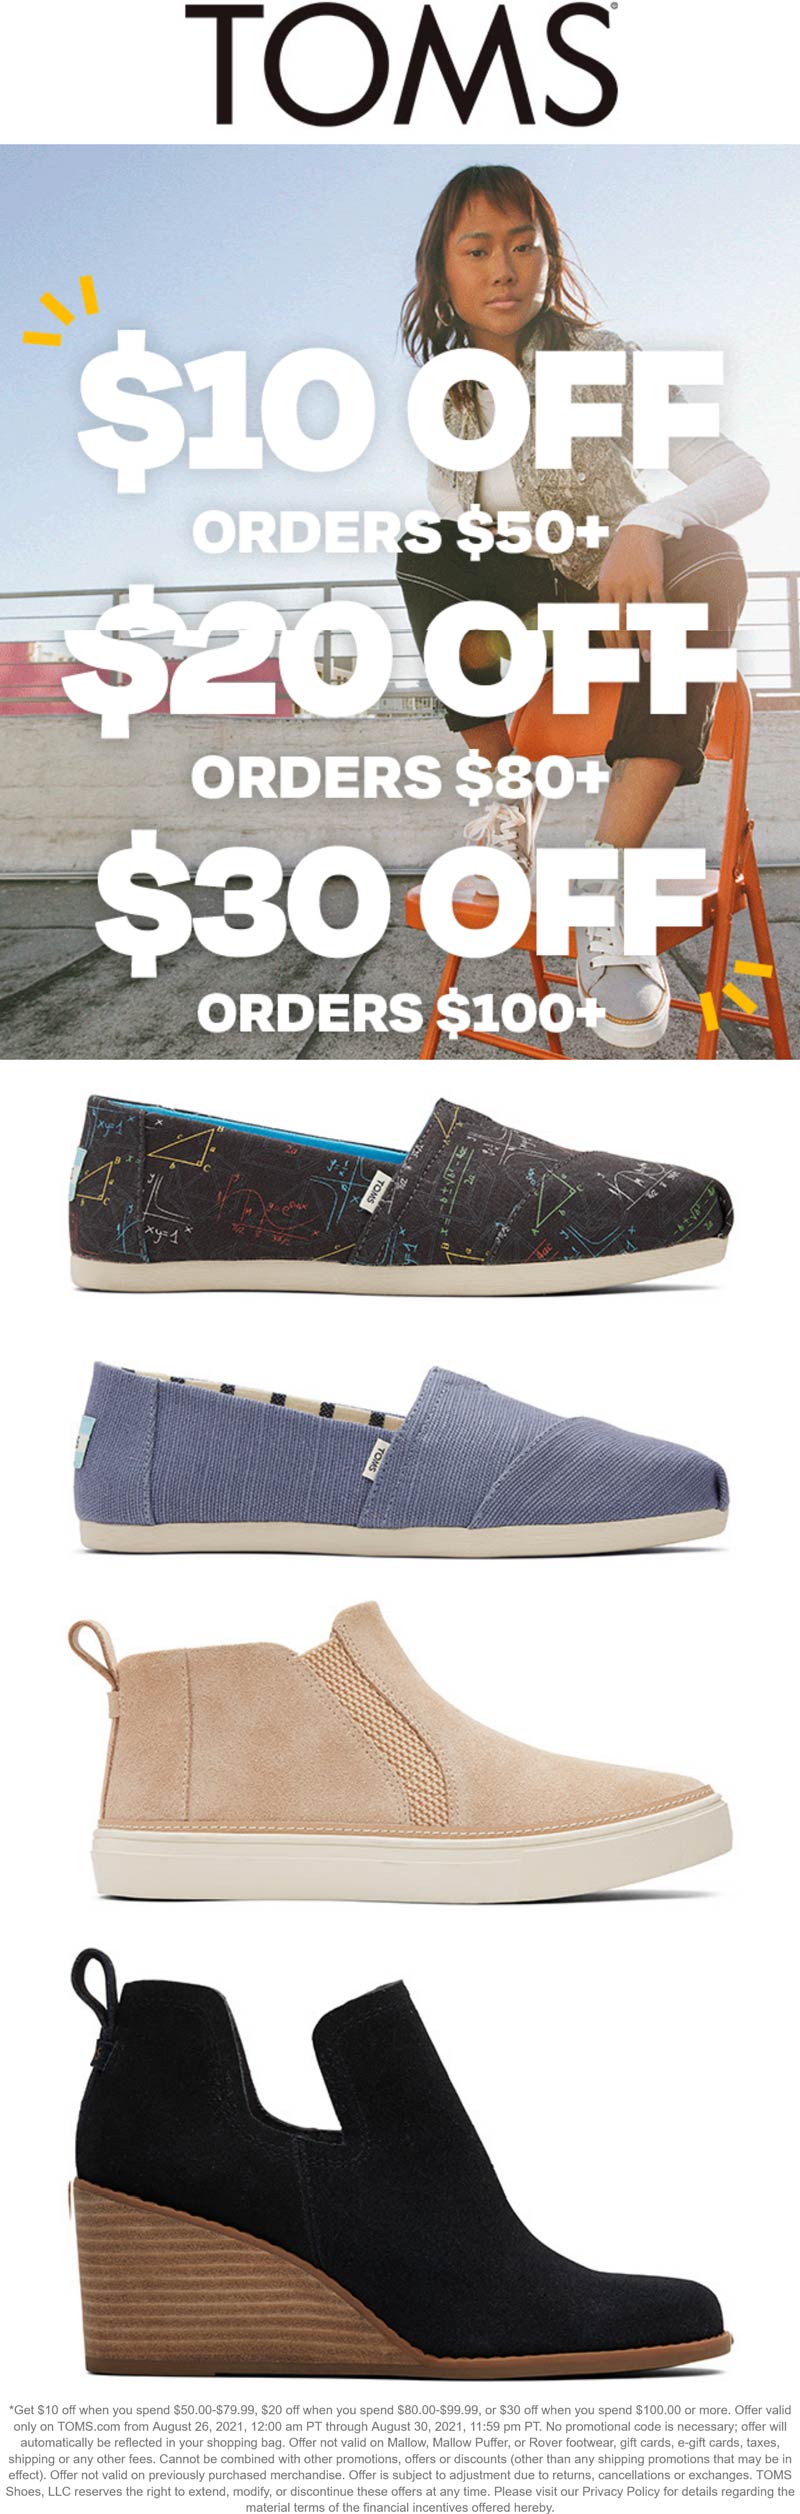 TOMS stores Coupon  $10-$30 off $50+ at TOMS Shoes #toms 